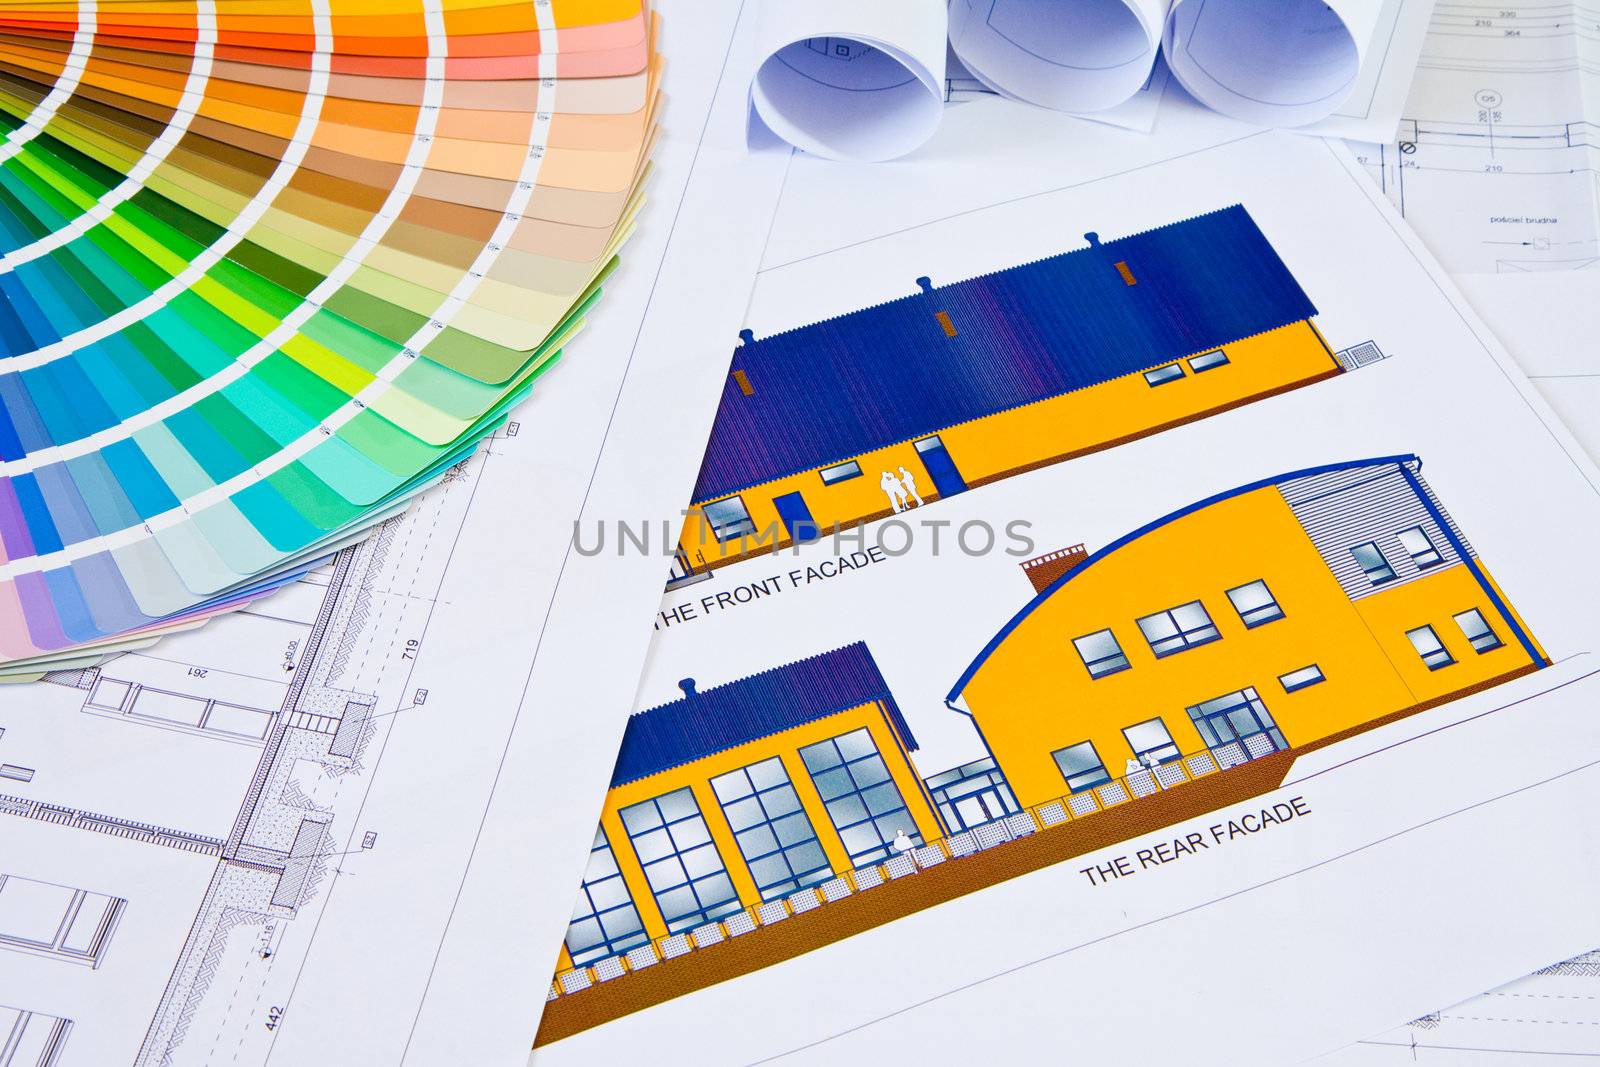 Palette of colors designs on architectural drawings